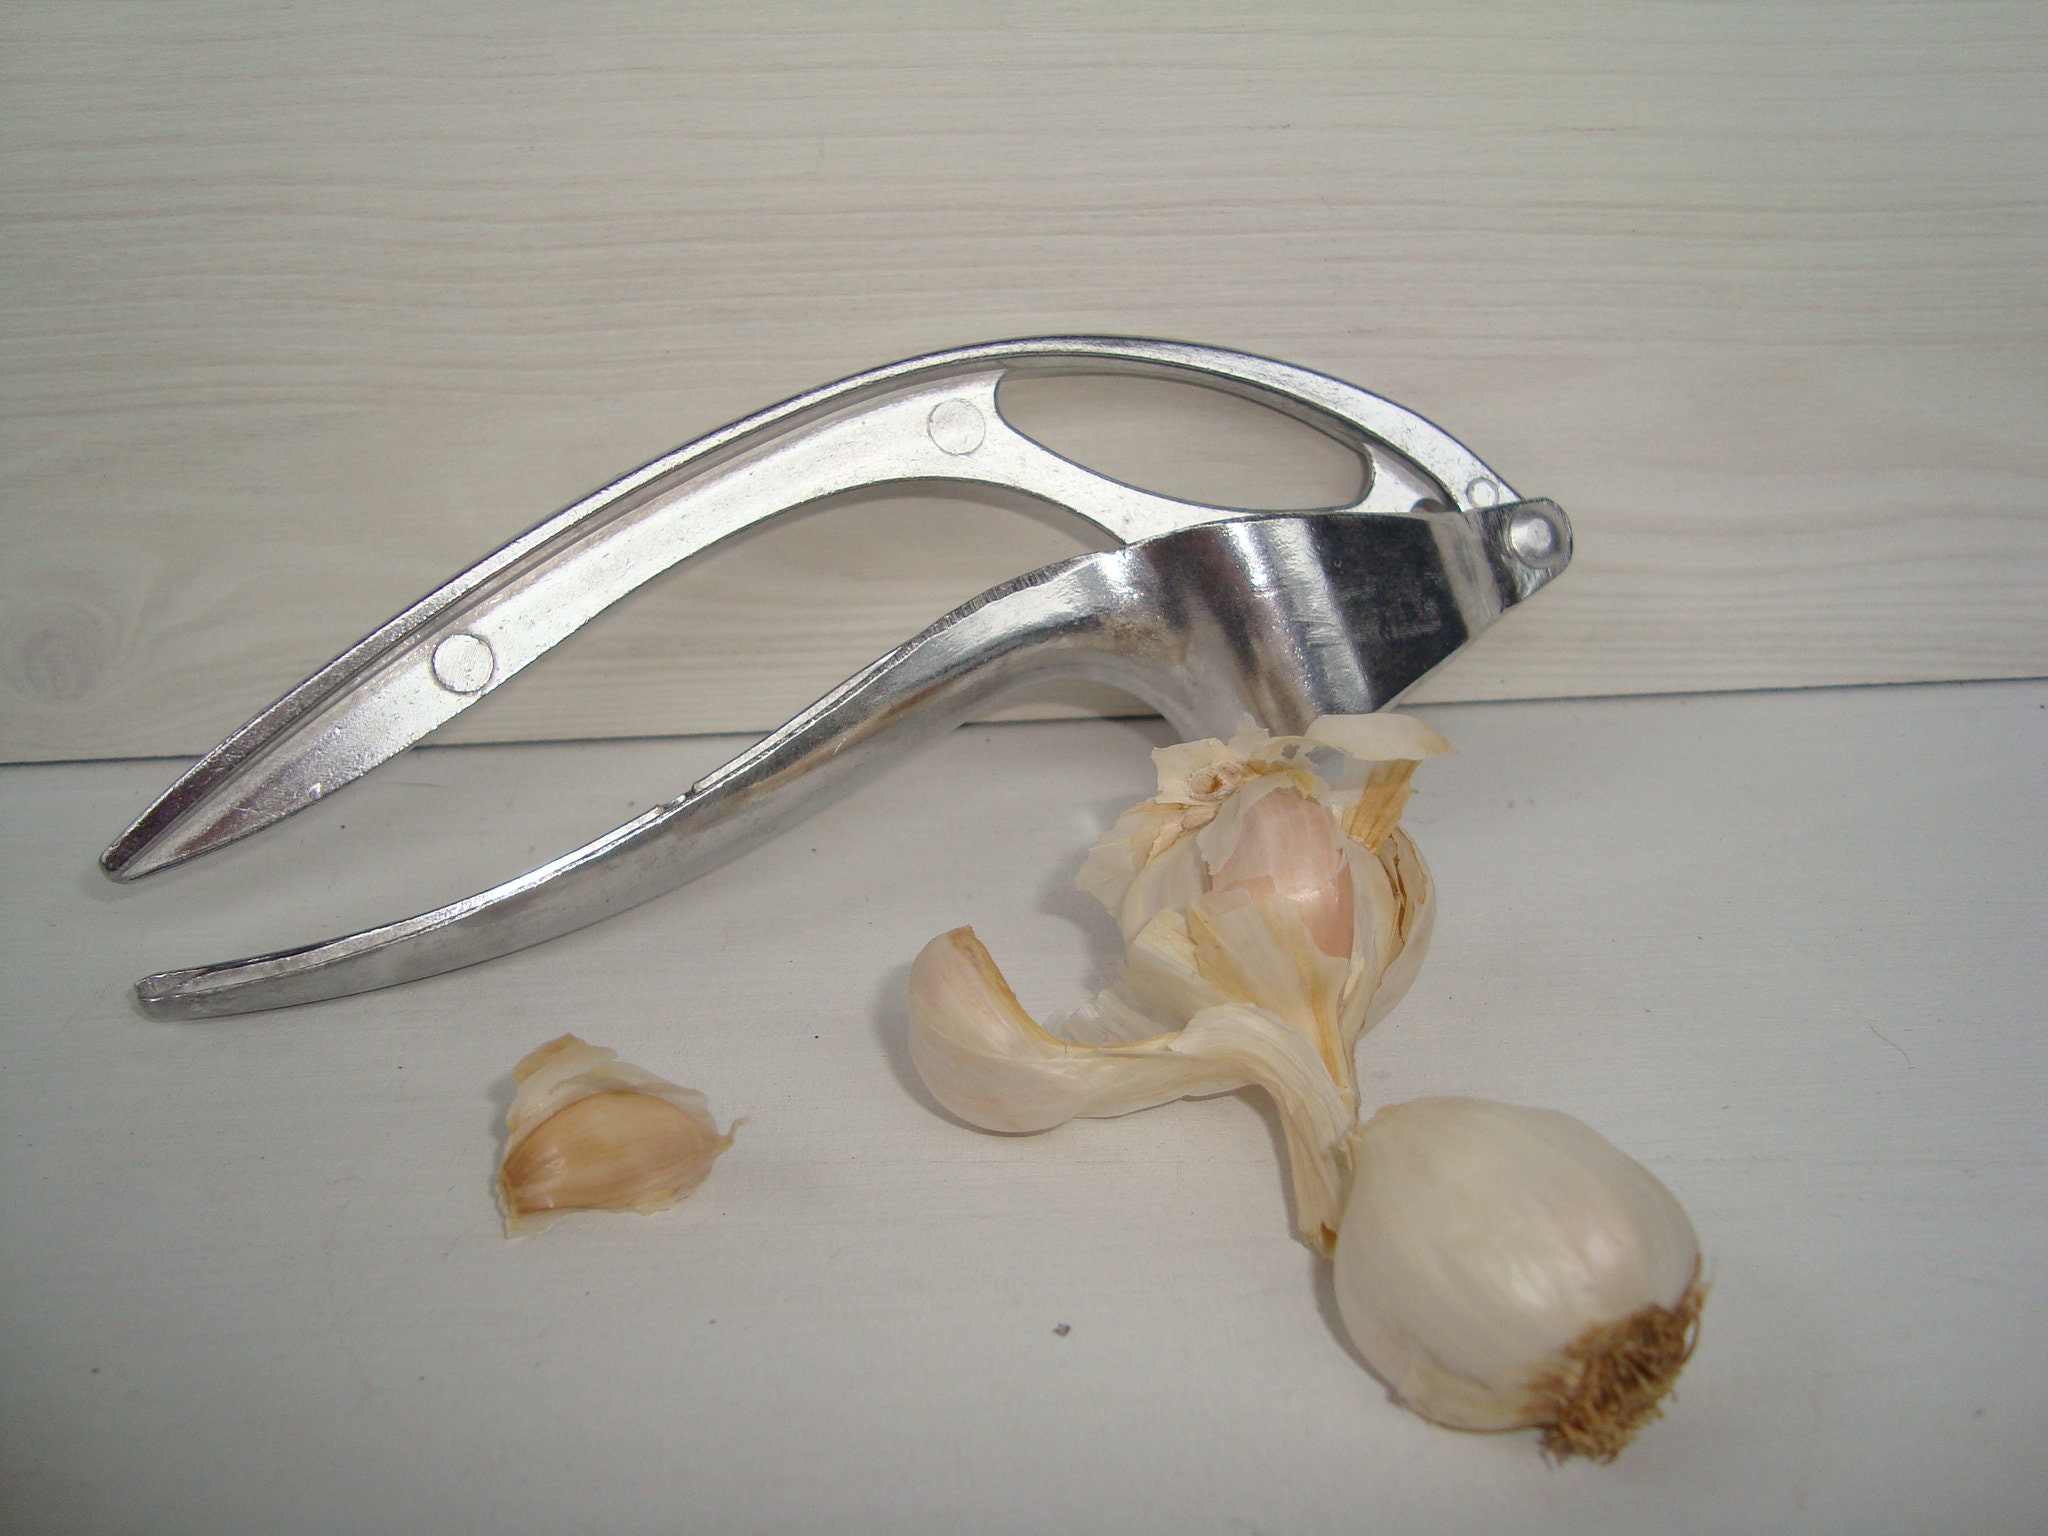 Searching for Antique Pampered Chef Garlic Press - Very similar to Zyliss  pictured : r/BuyItForLife